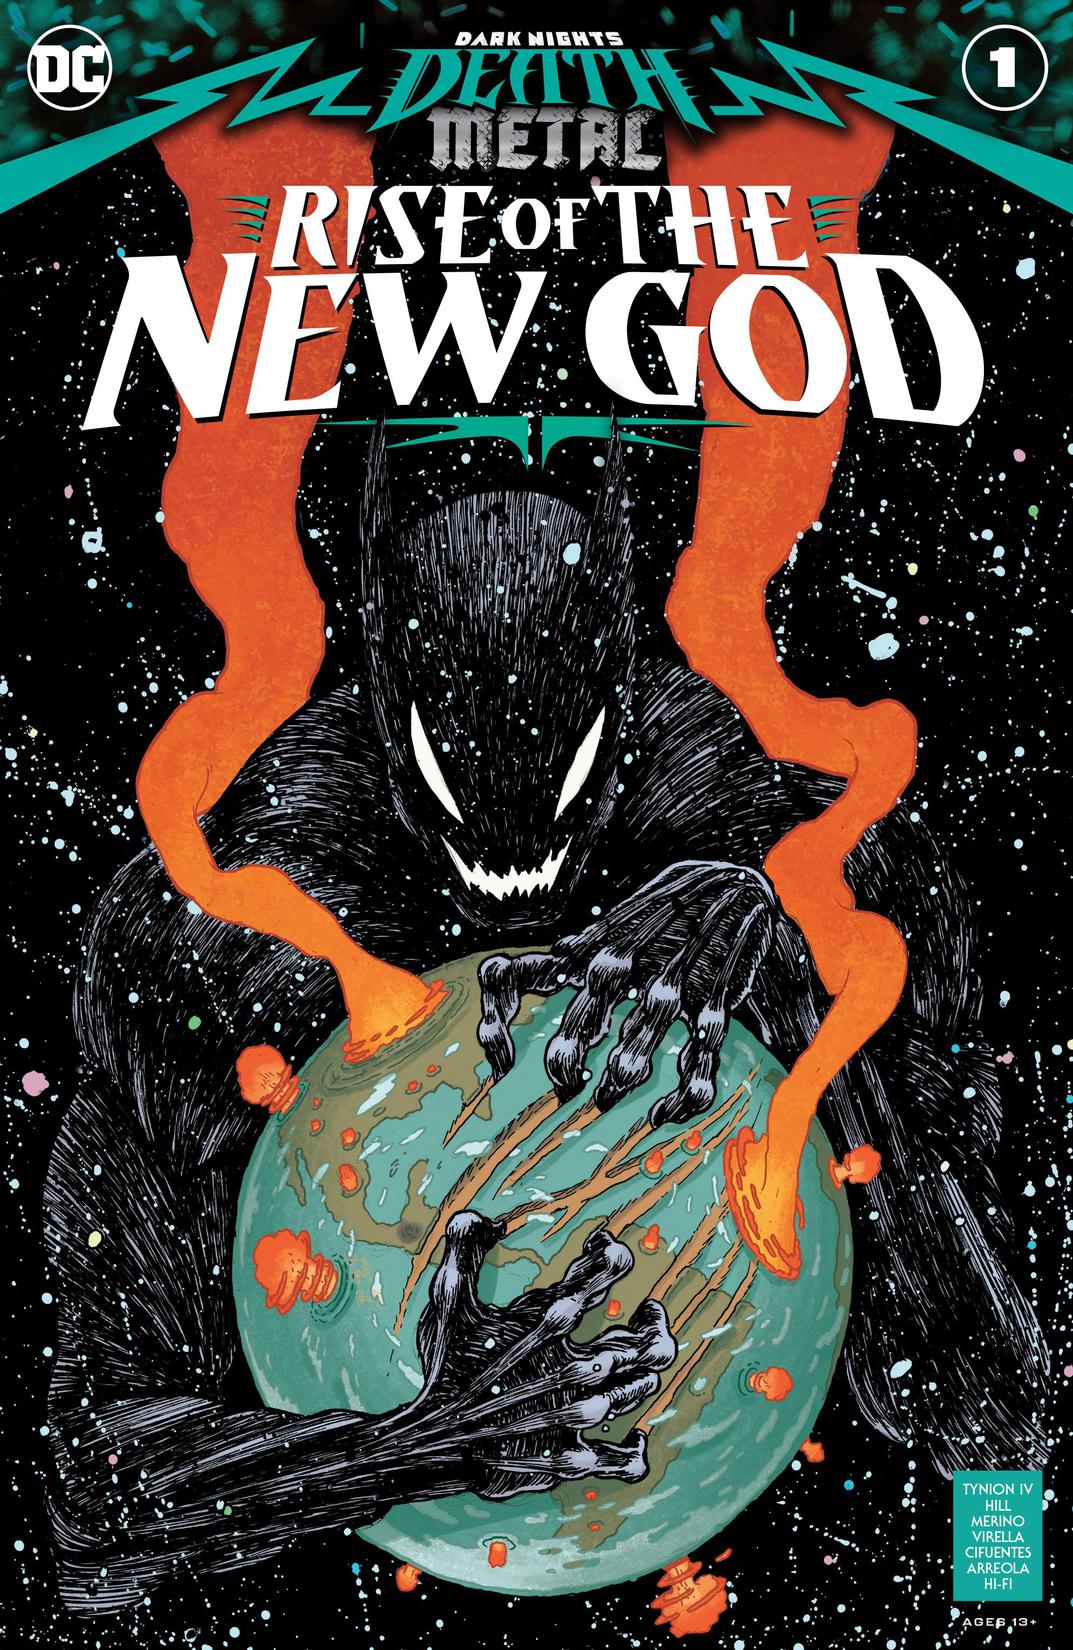 Dark Nights: Death Metal Rise of the New God #1 preview images